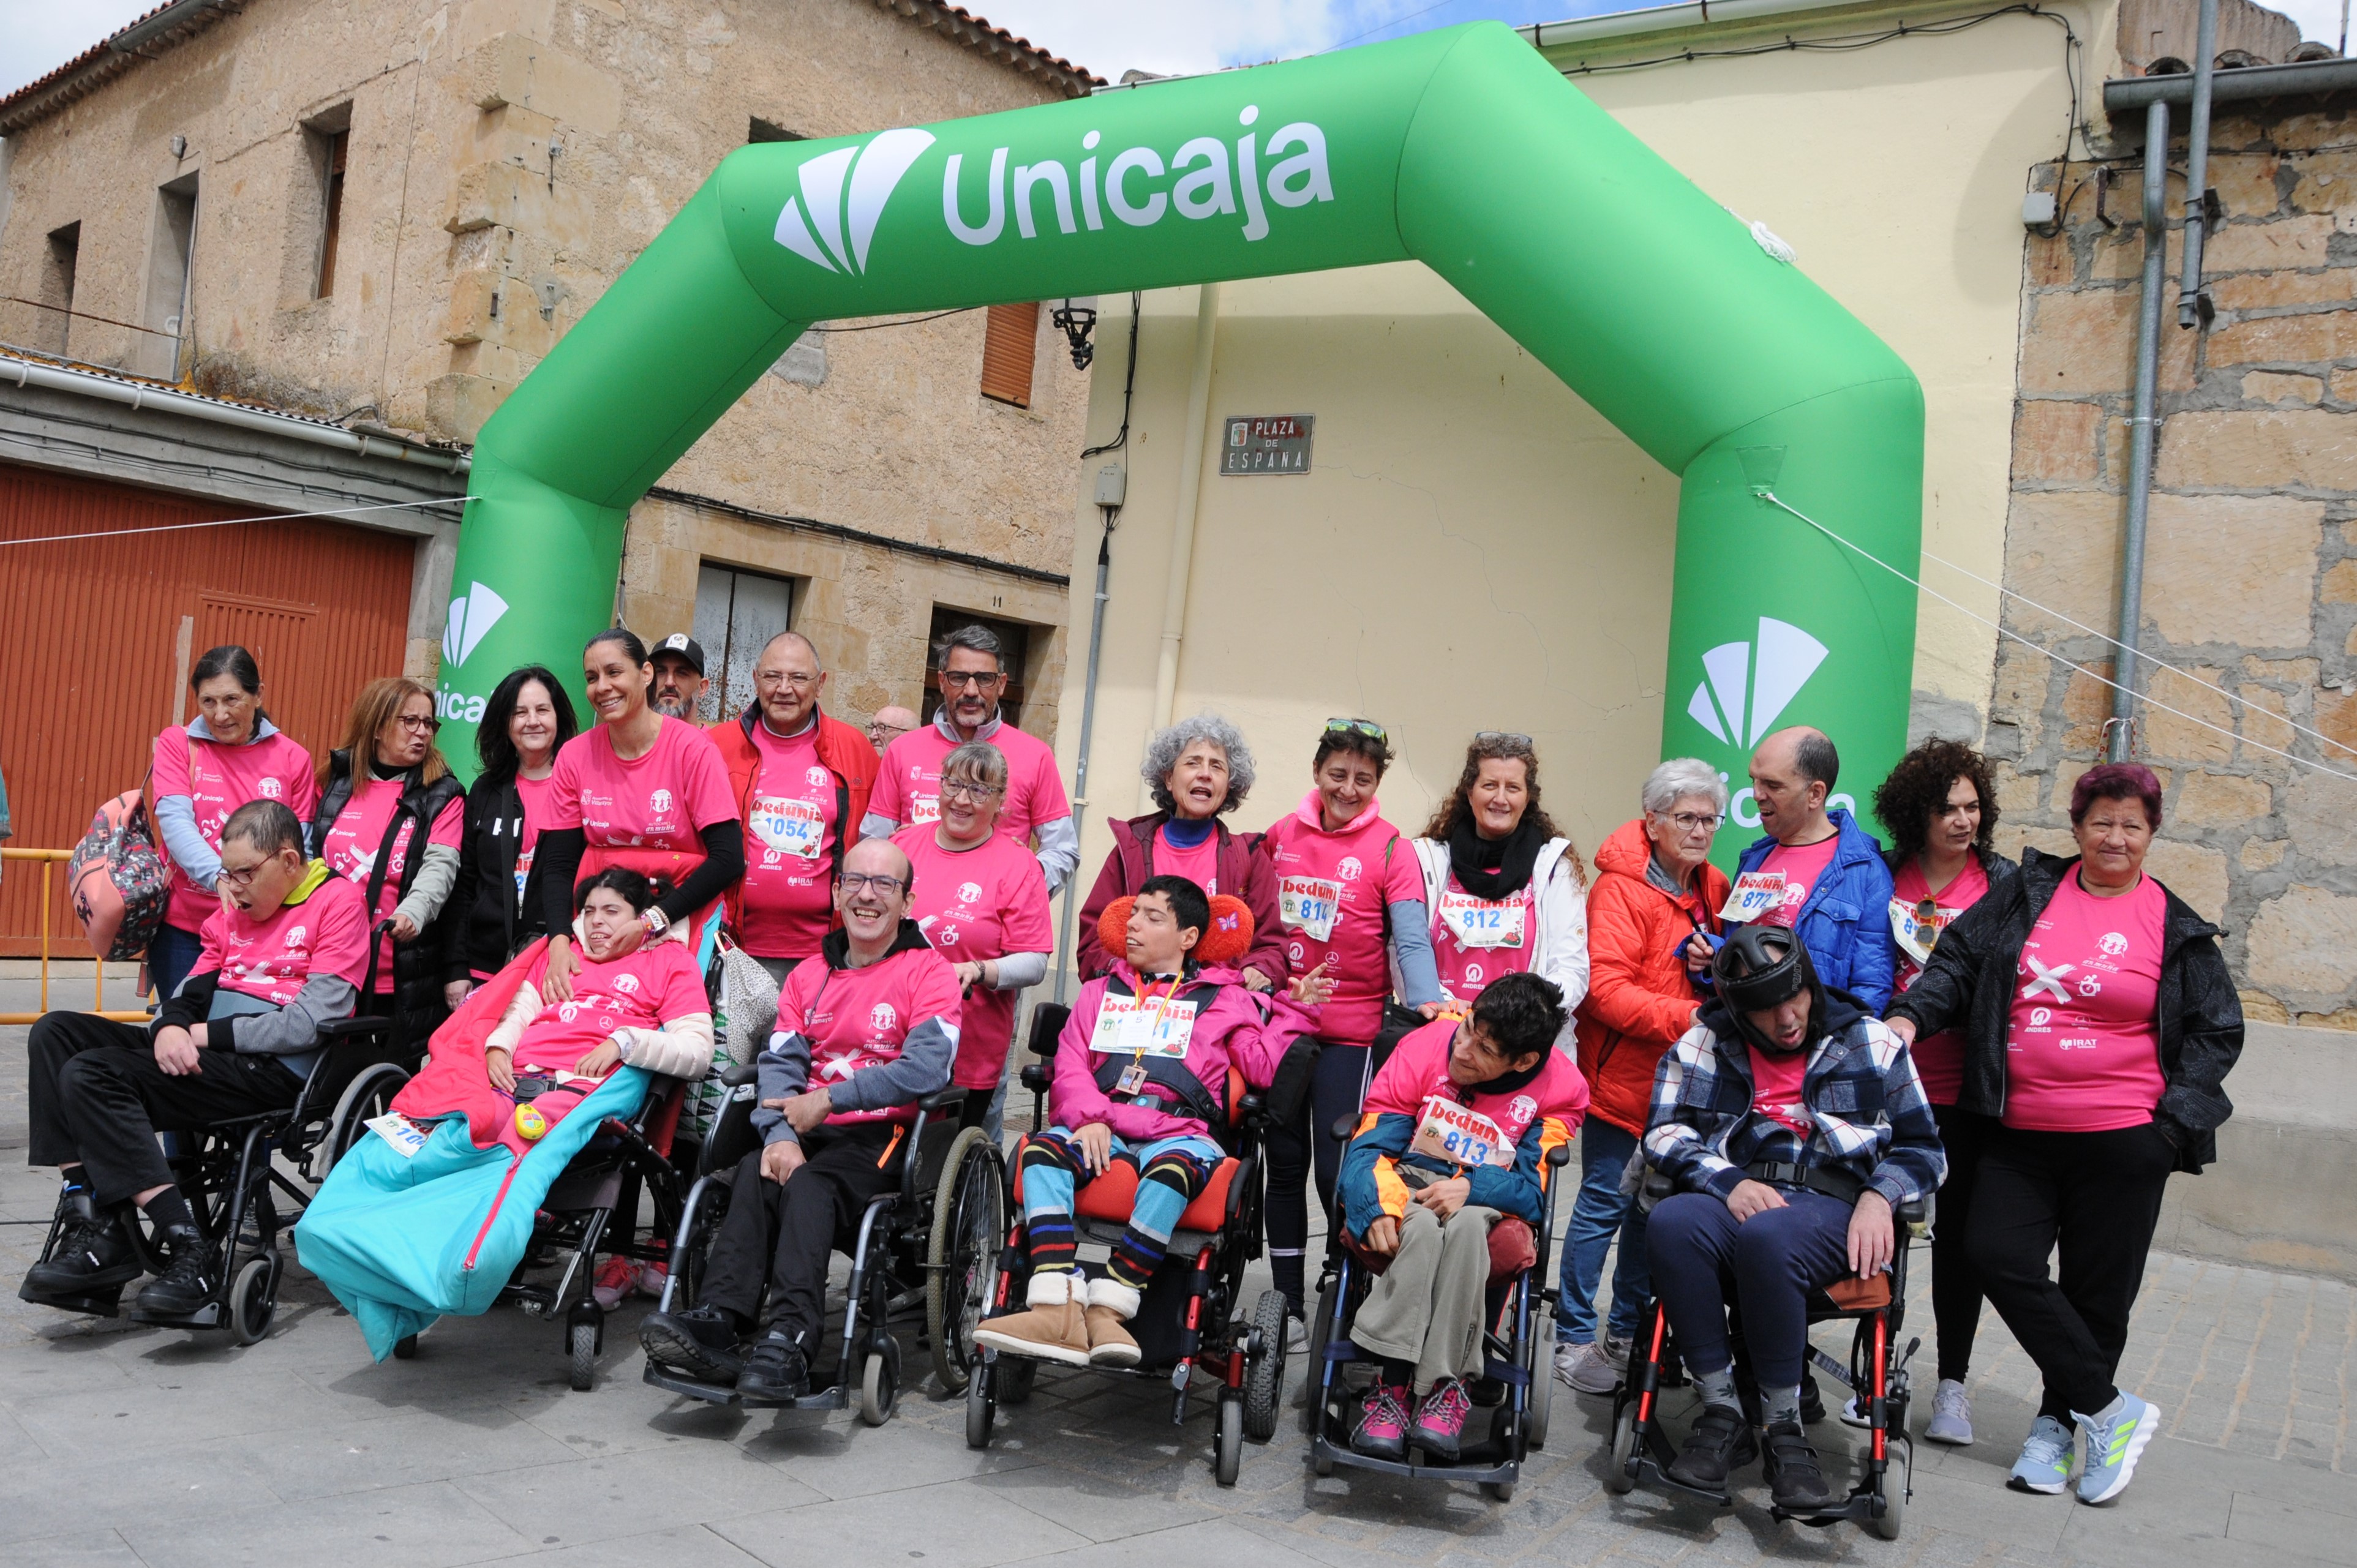 Unicaja collaborates in a charity 'cross' to help people affected by cerebral palsy in Salamanca and Castilla y Leon